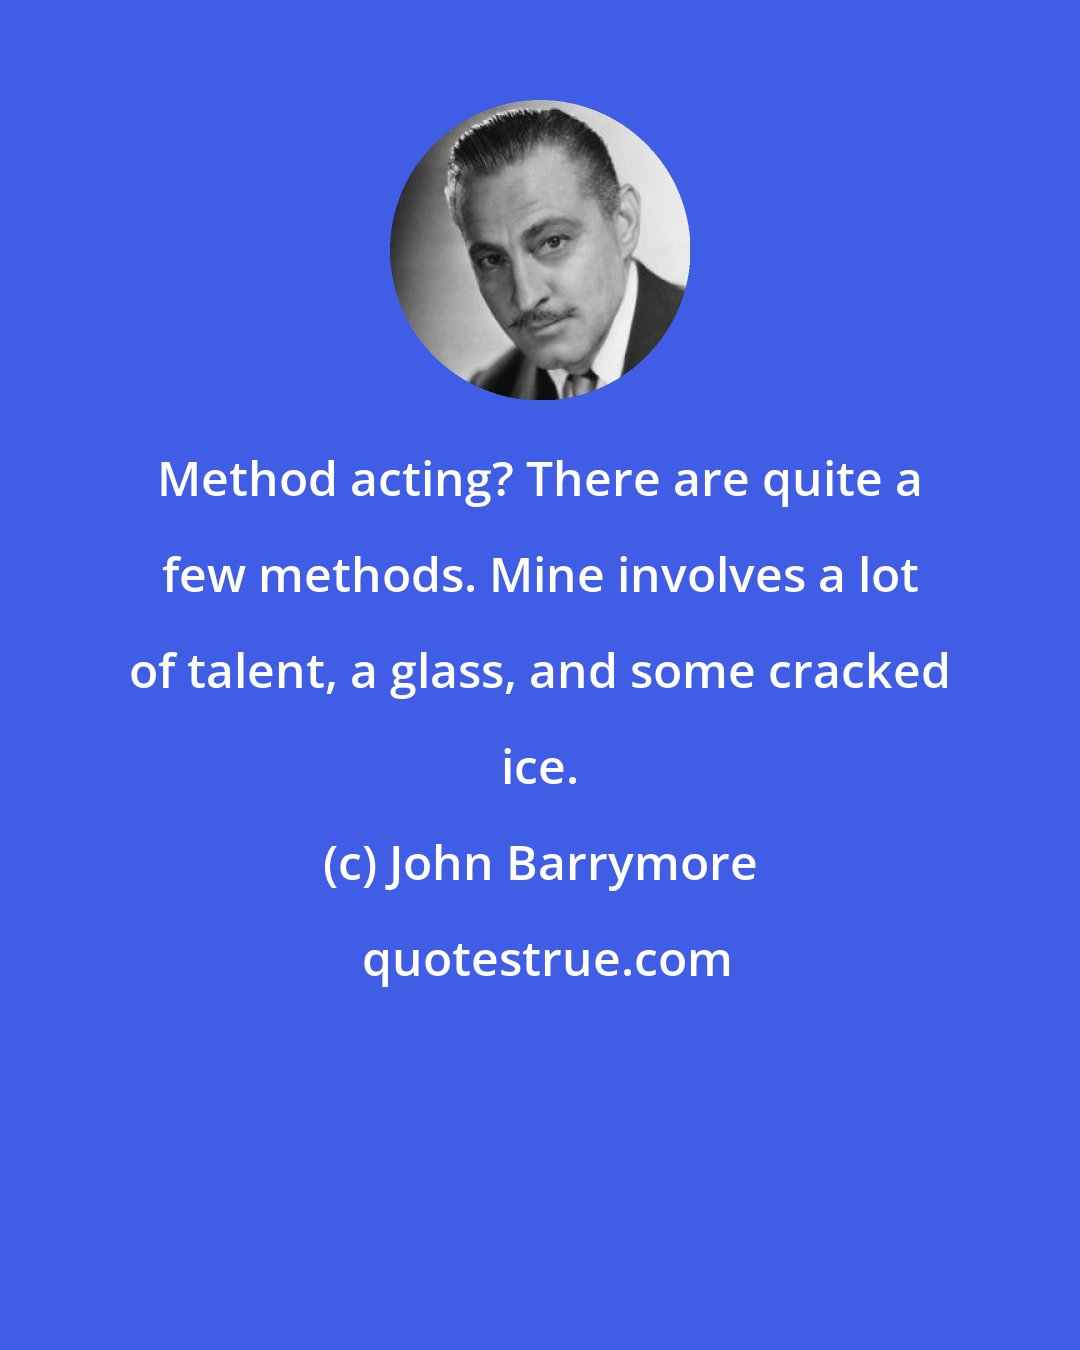 John Barrymore: Method acting? There are quite a few methods. Mine involves a lot of talent, a glass, and some cracked ice.